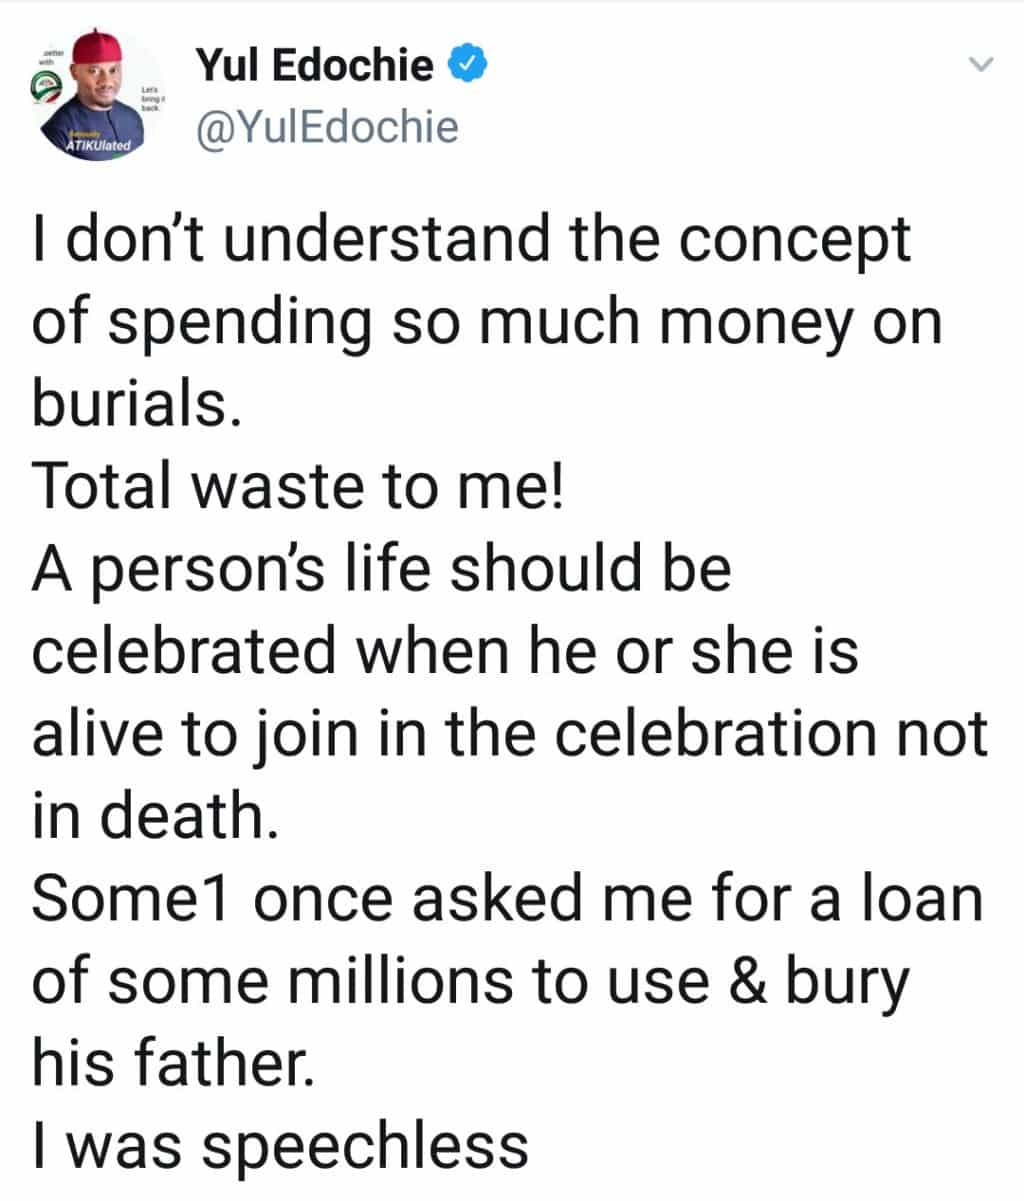 “Spending so much money on burials is a total waste to me”- Yul Edochie